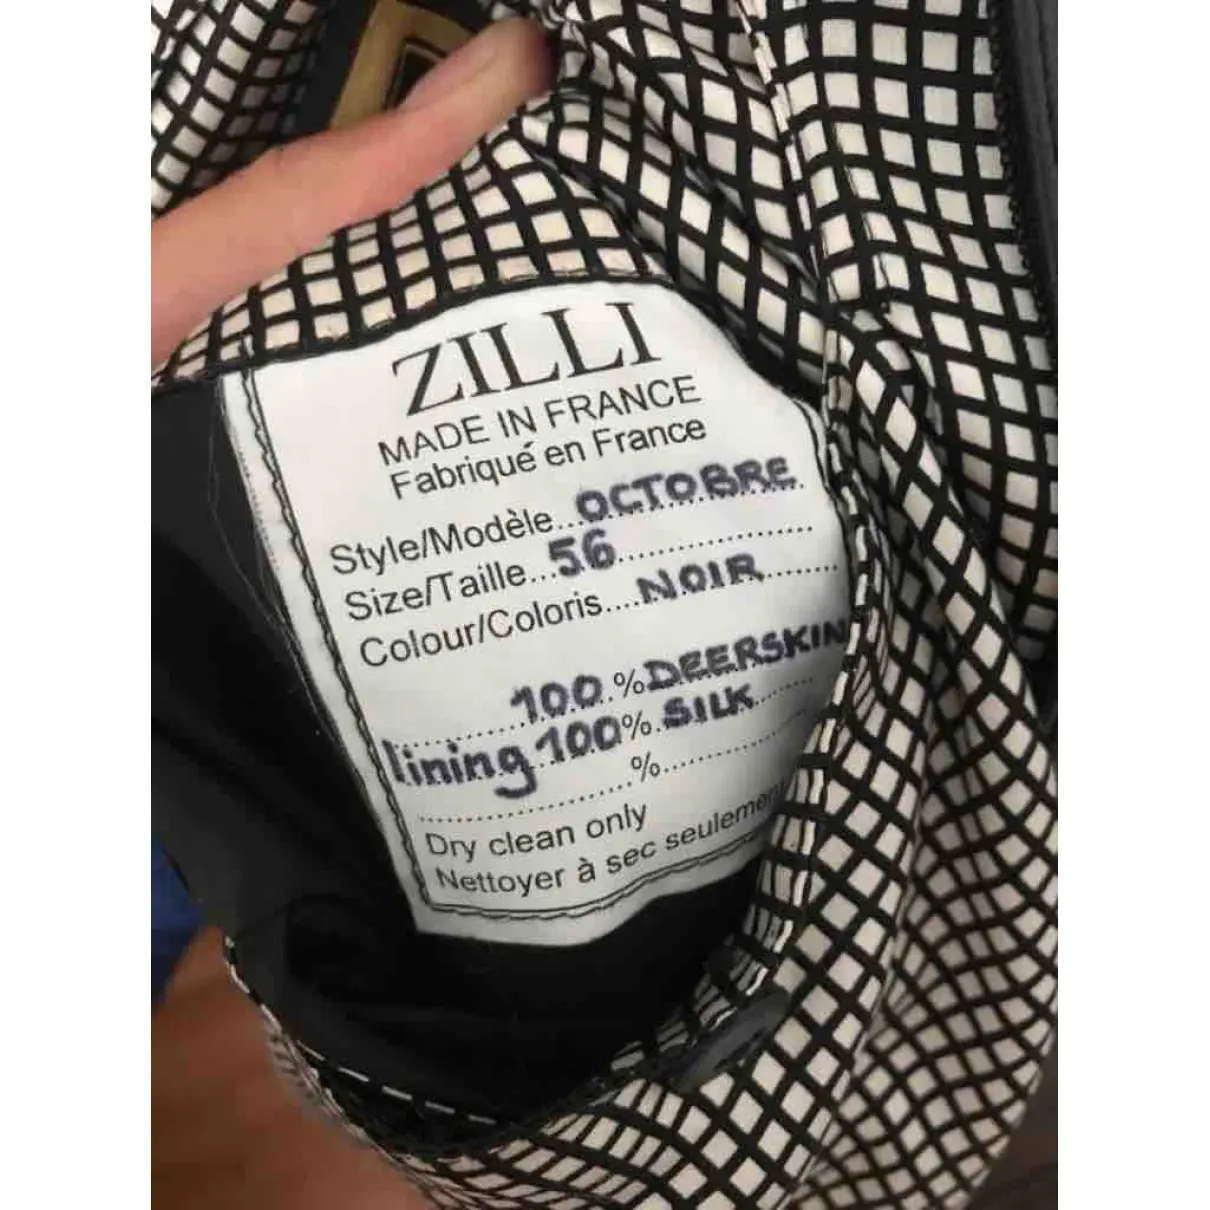 Zilli Leather jacket for sale